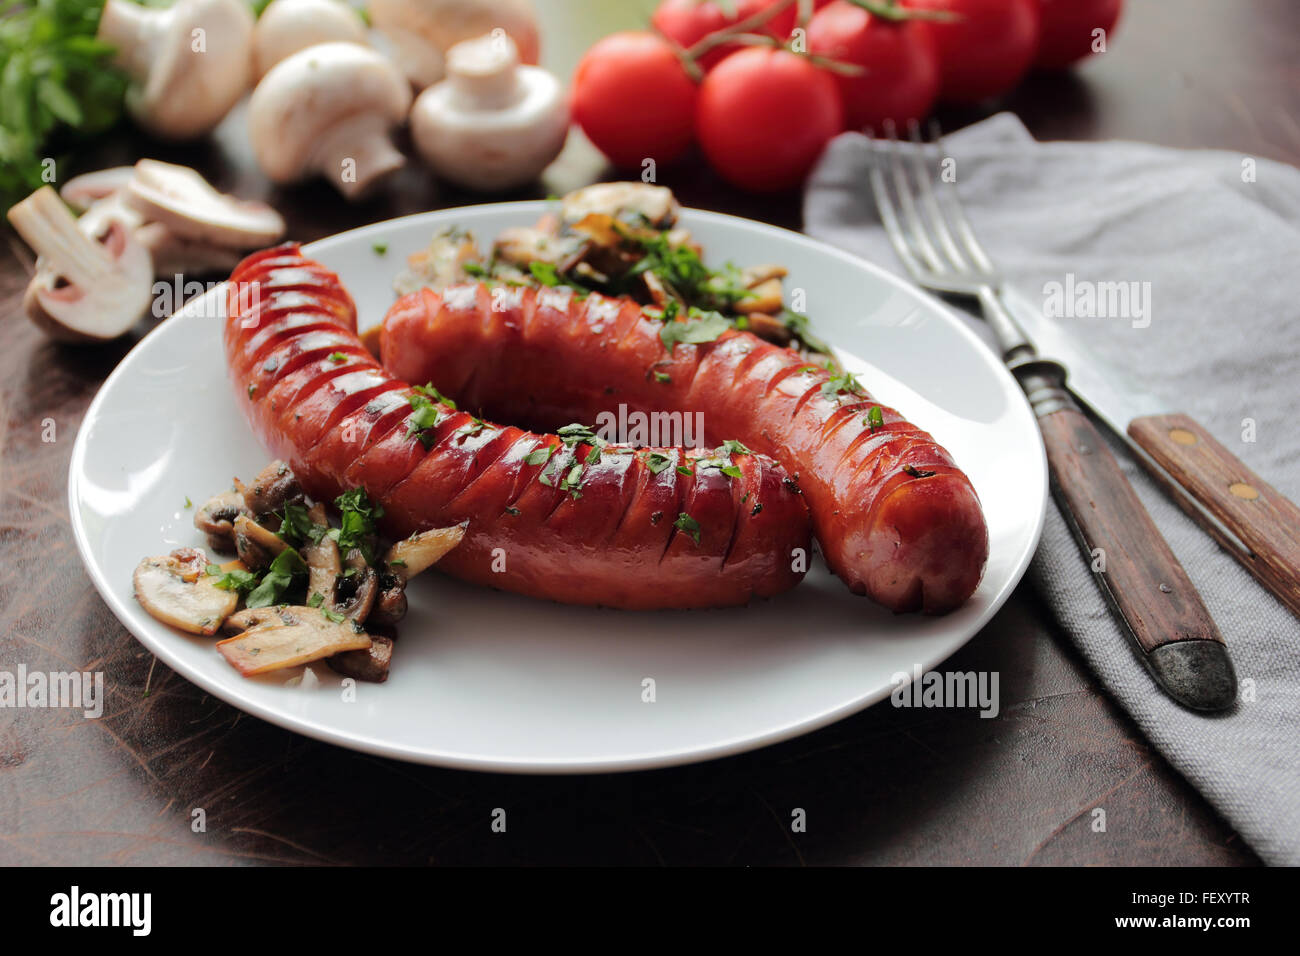 Grilled sausages with roasted mushrooms on white plate Stock Photo